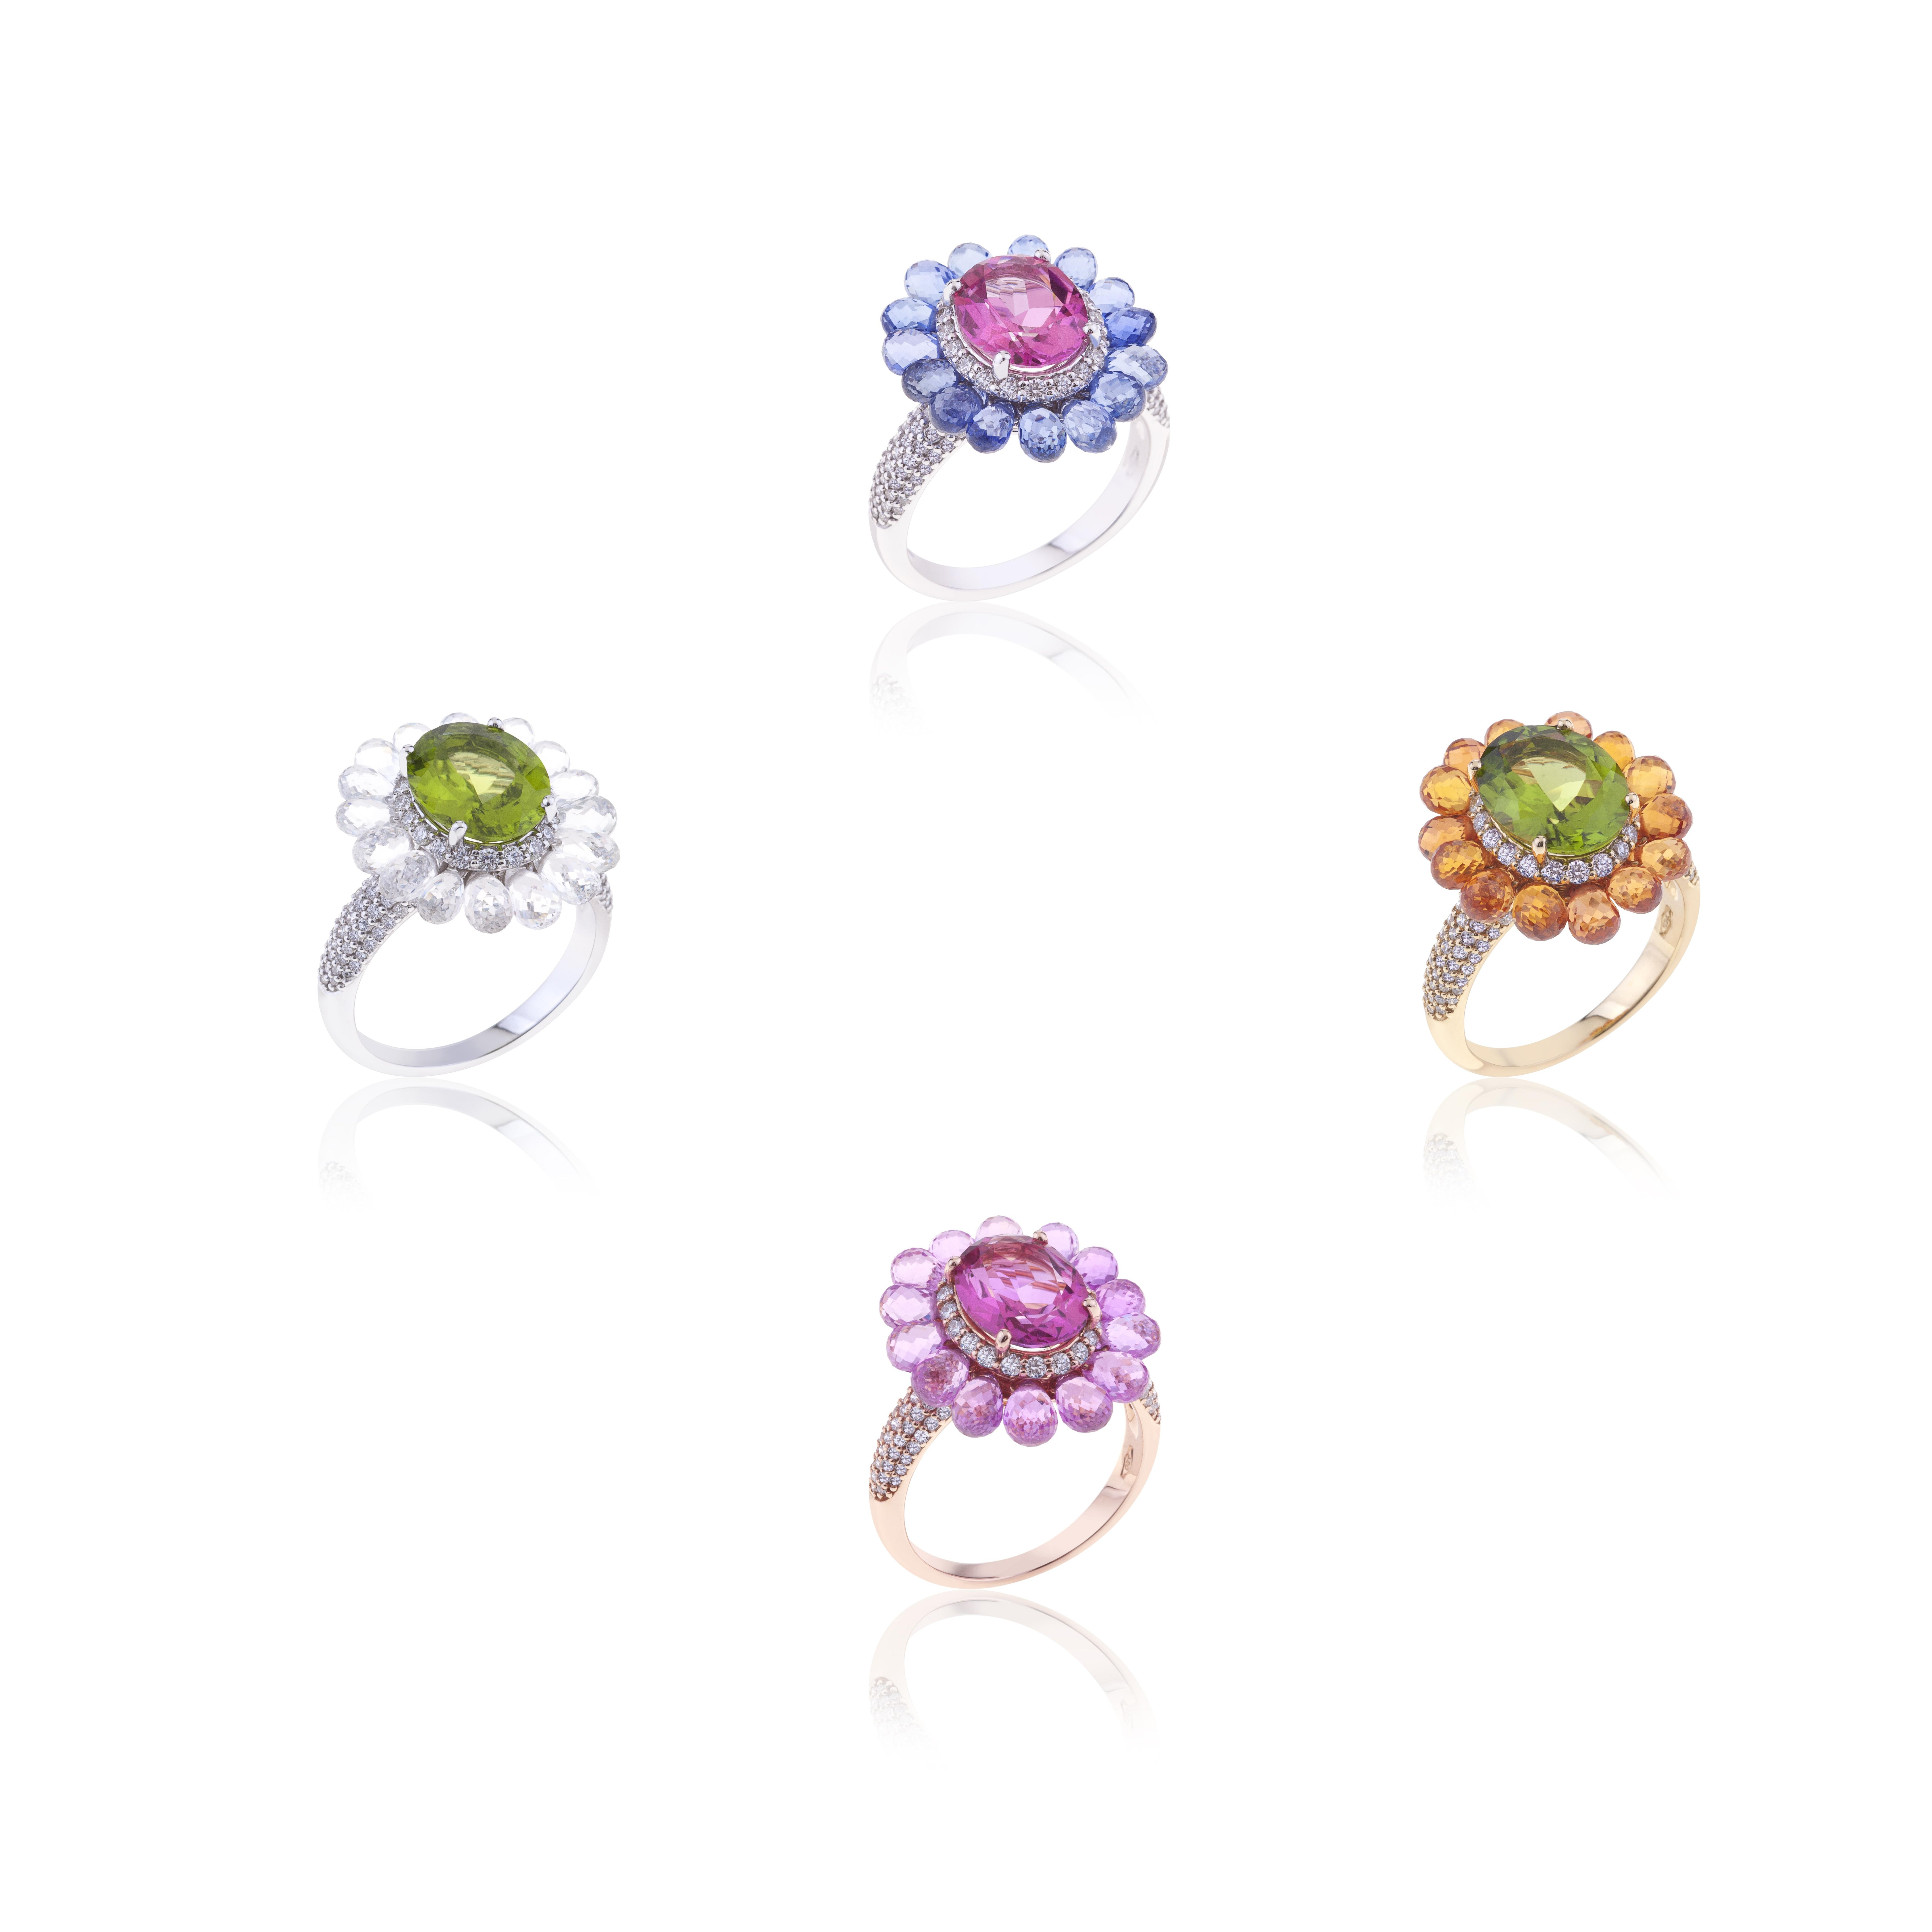 Flower Happy Ring 18kt Gold With Oval Peridot, Pear Orange Sapphires and Diamonds.
This coloured ring transmit Happiness to ladies who will wear it, together with preciousness deriving from a circle of natural white sapphires.
Gold Weight is around